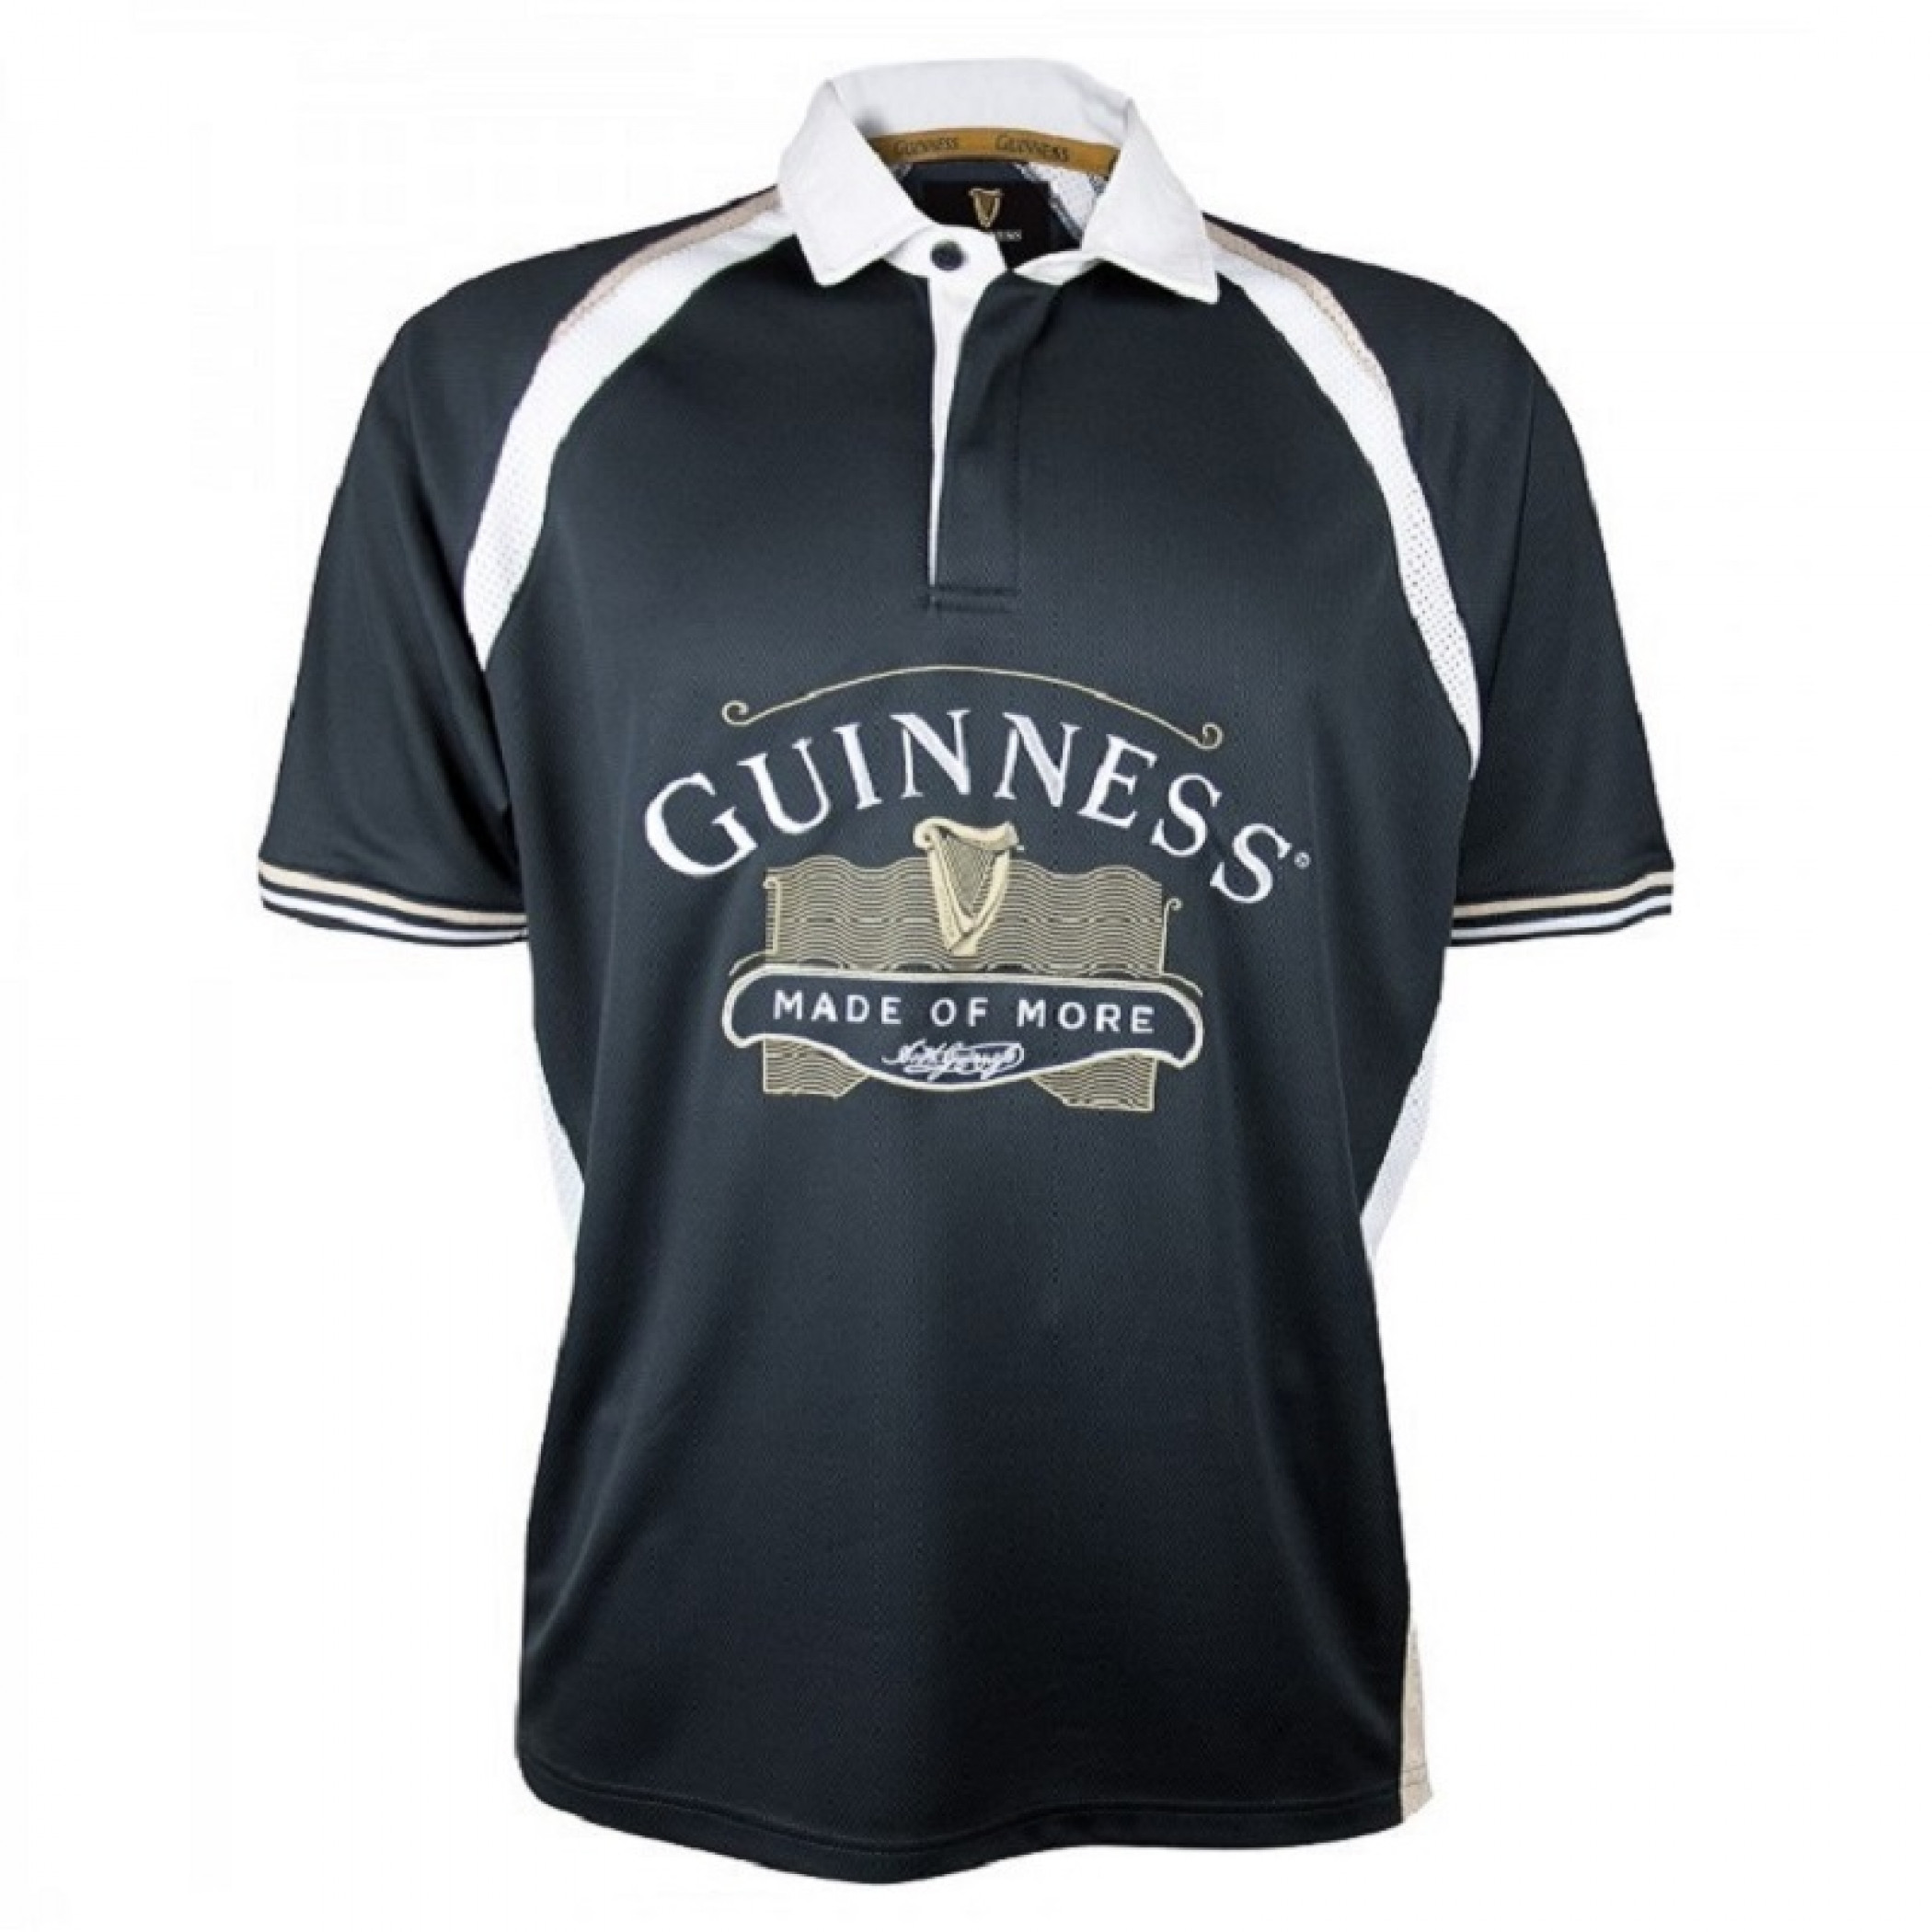 Guinness Made of More Rugby Jersey